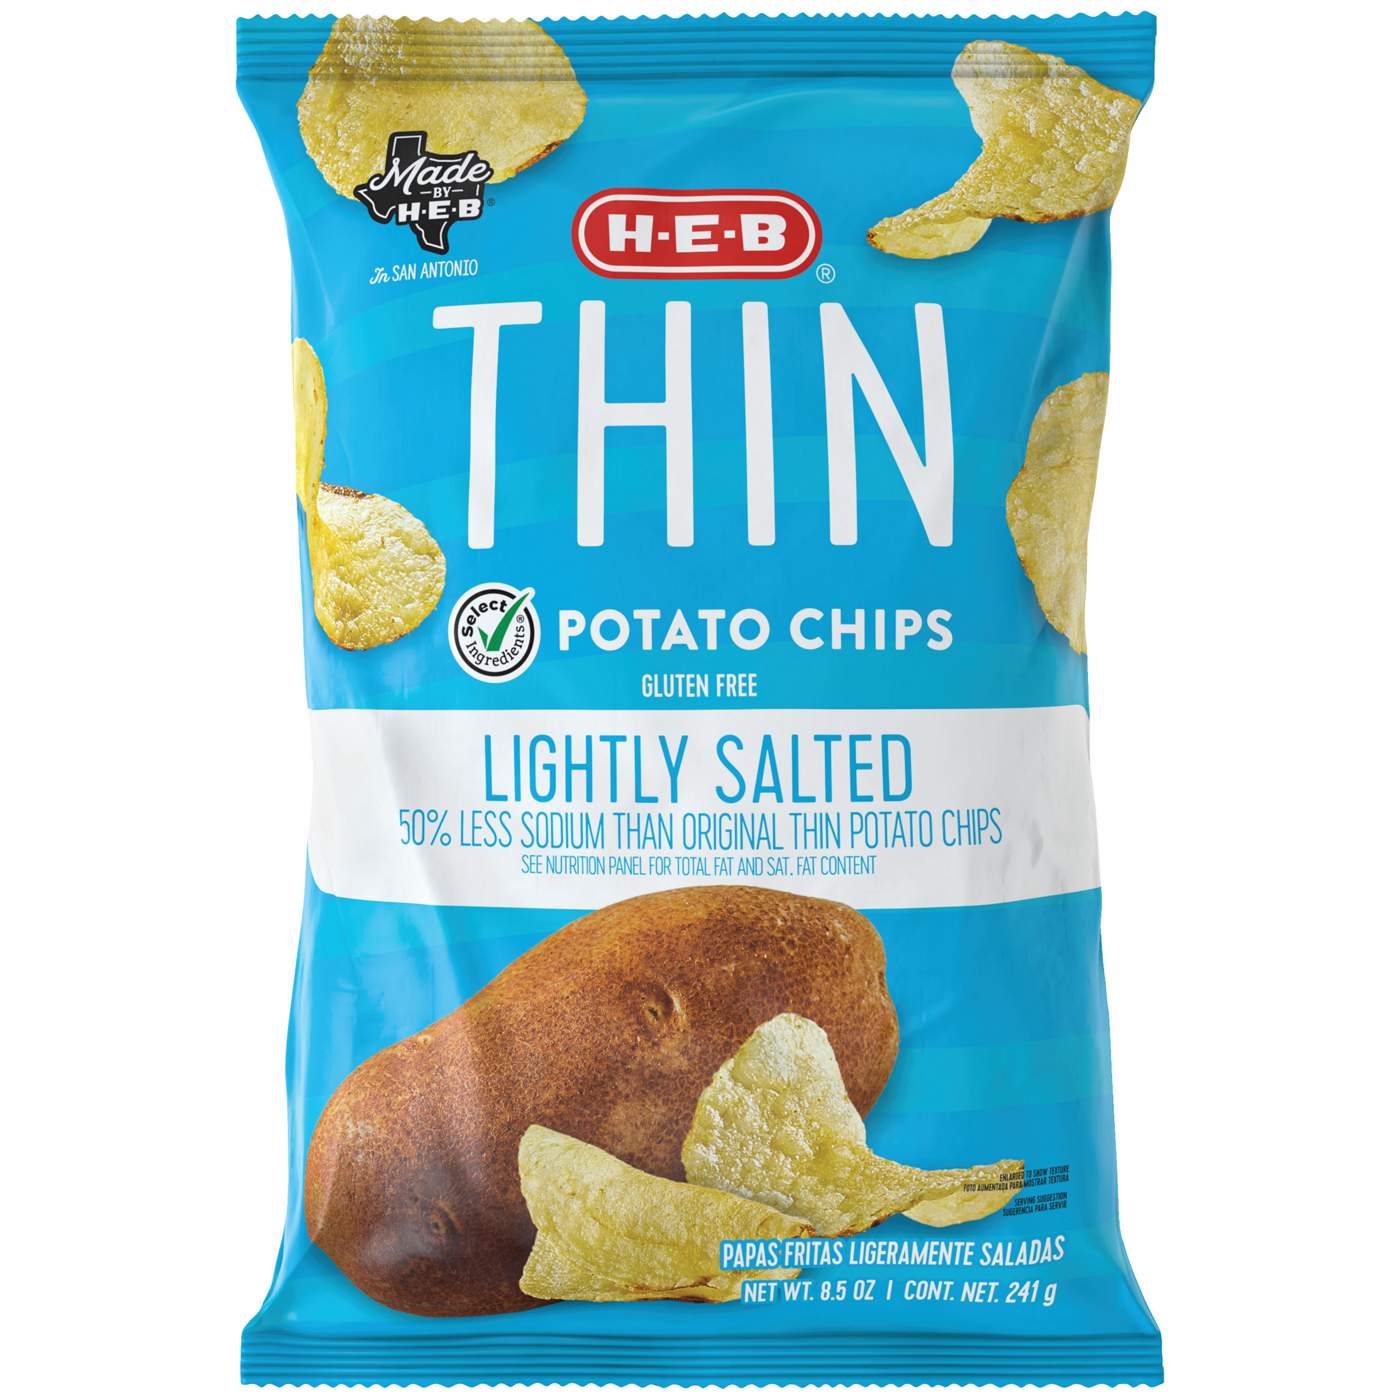 H-E-B Thin Potato Chips - Lightly Salted; image 1 of 2